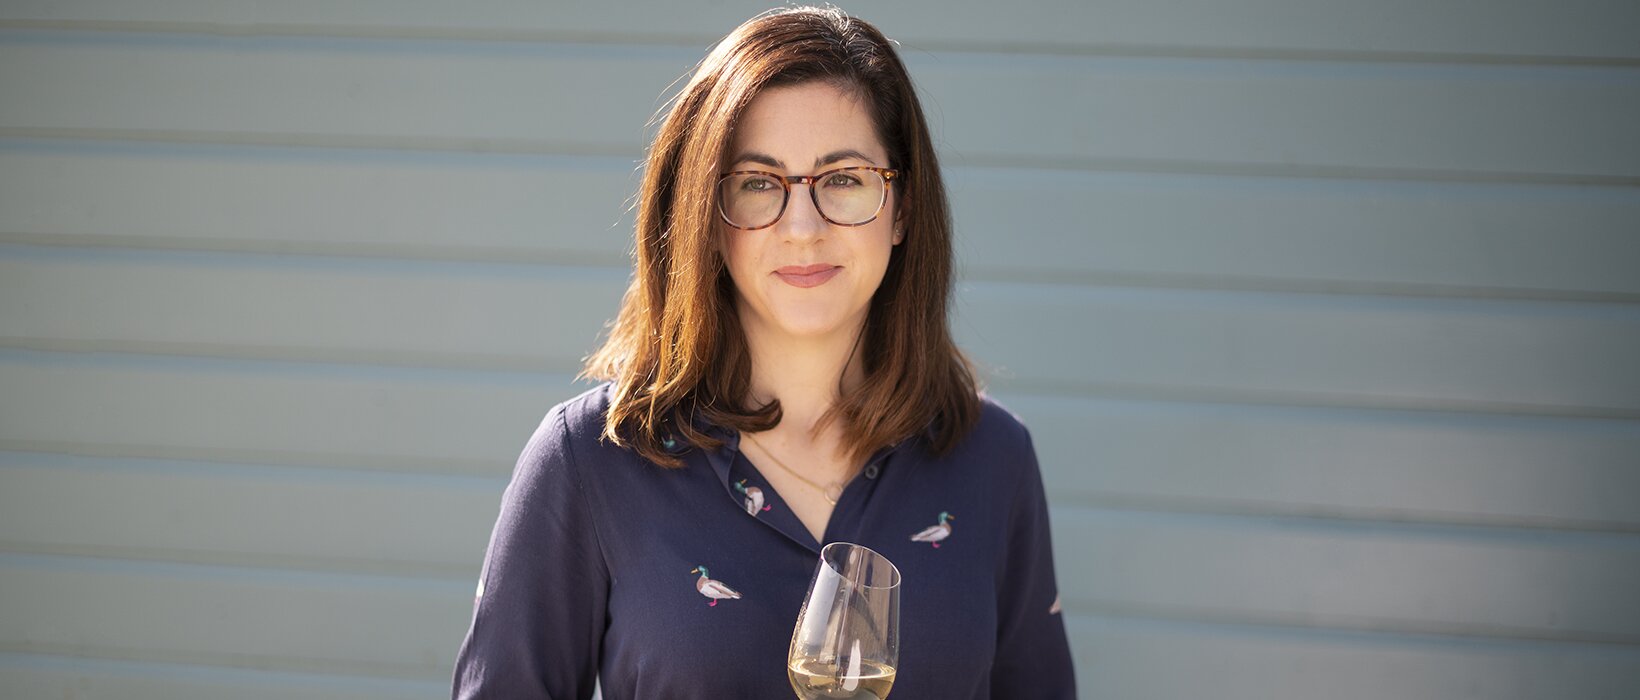 Raise a glass with Lydia Harrowven, head of wine at Adnams